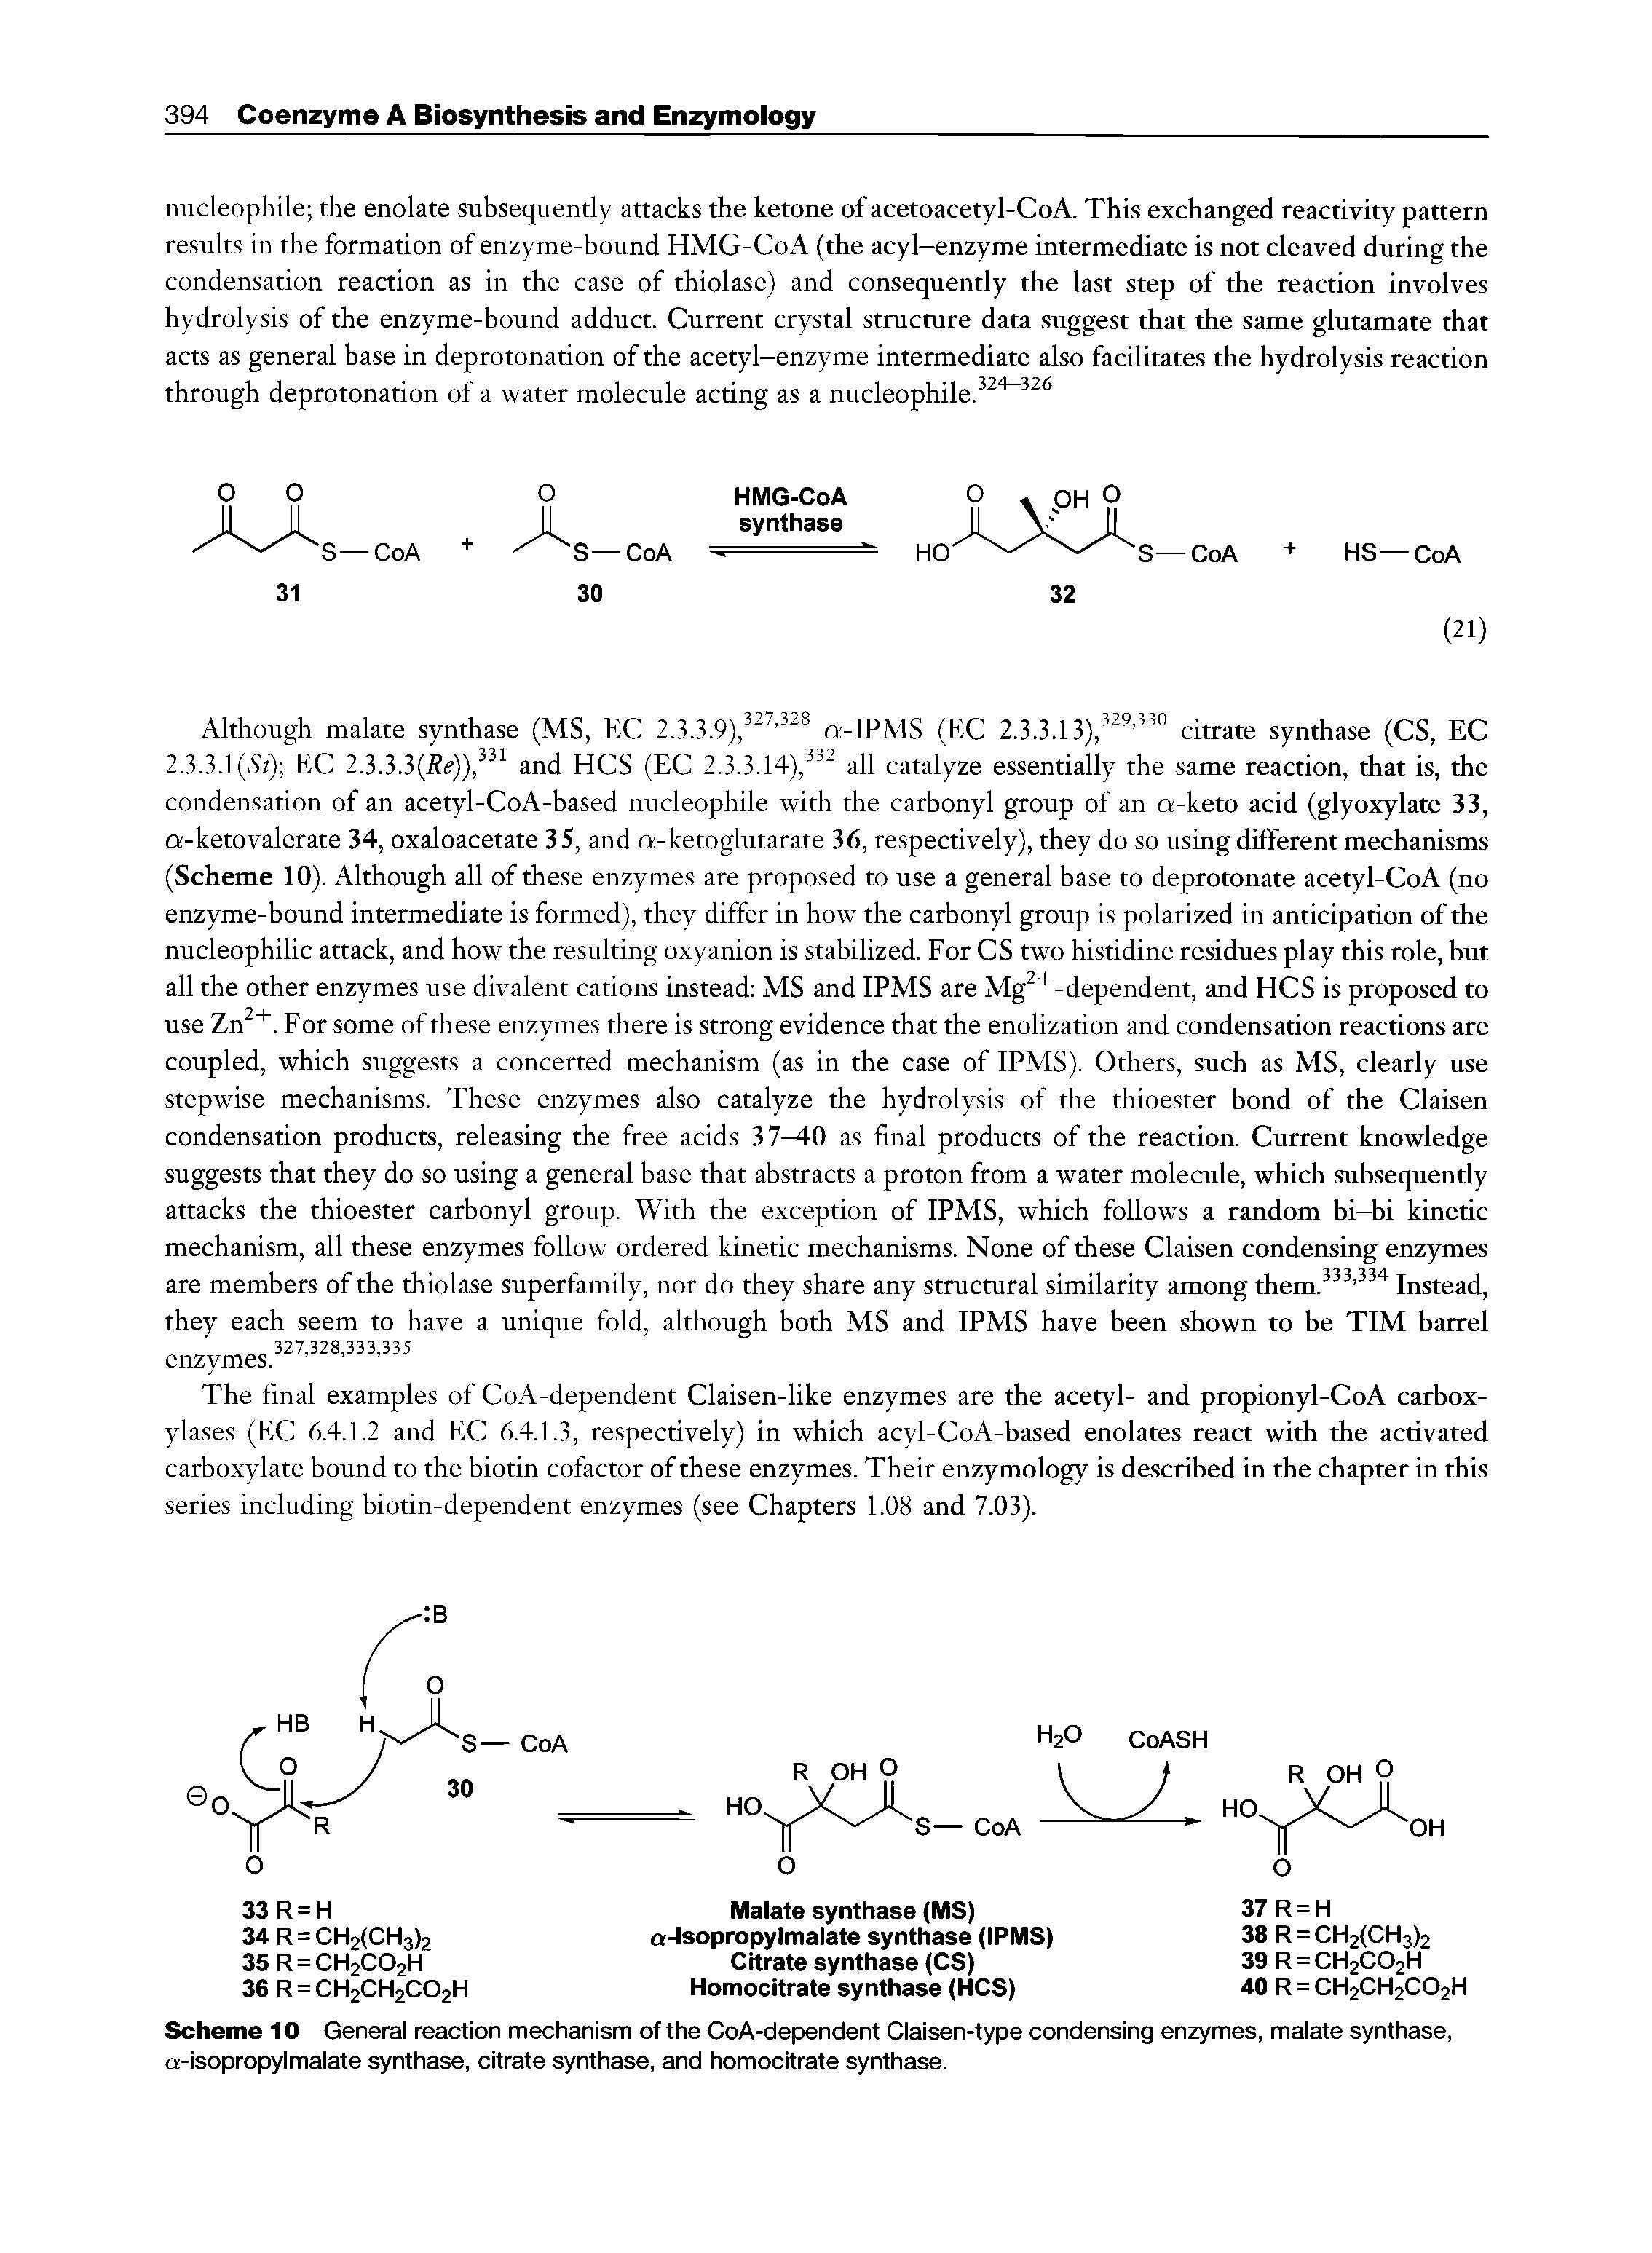 Scheme 10 General reaction mechanism of the CoA-dependent Claisen-type condensing enzymes, malate synthase, a-isopropylmalate synthase, citrate synthase, and homocitrate synthase.